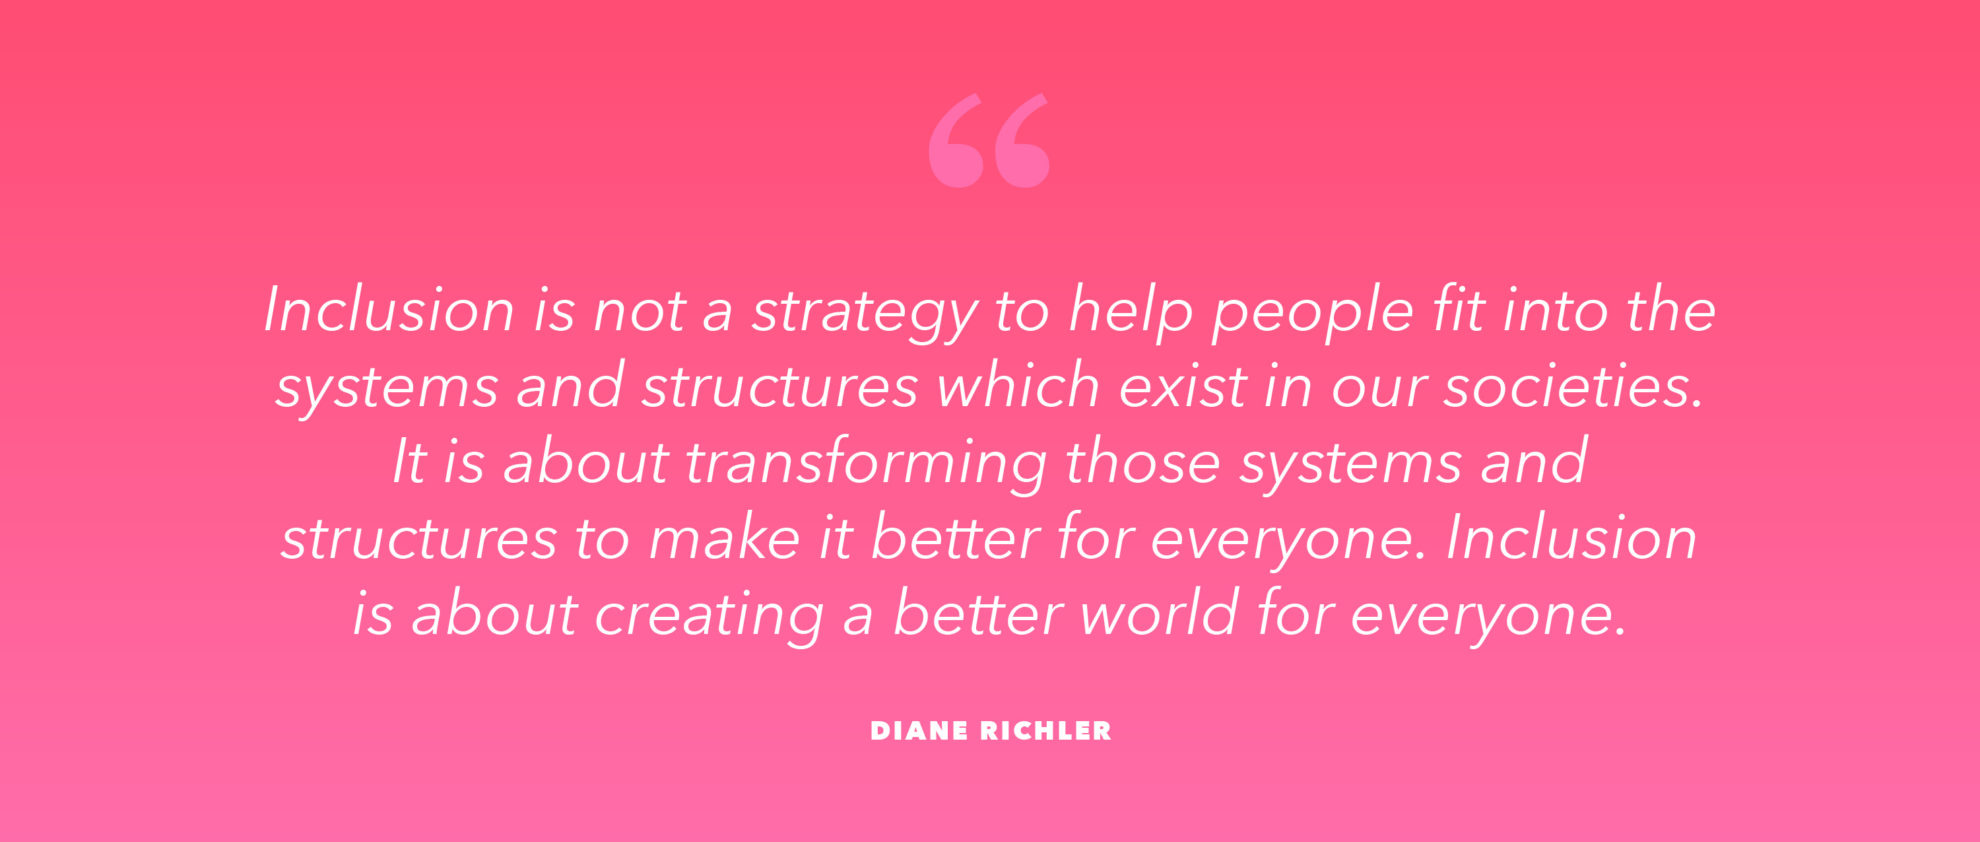 Quote about inclusion by Diane Richler